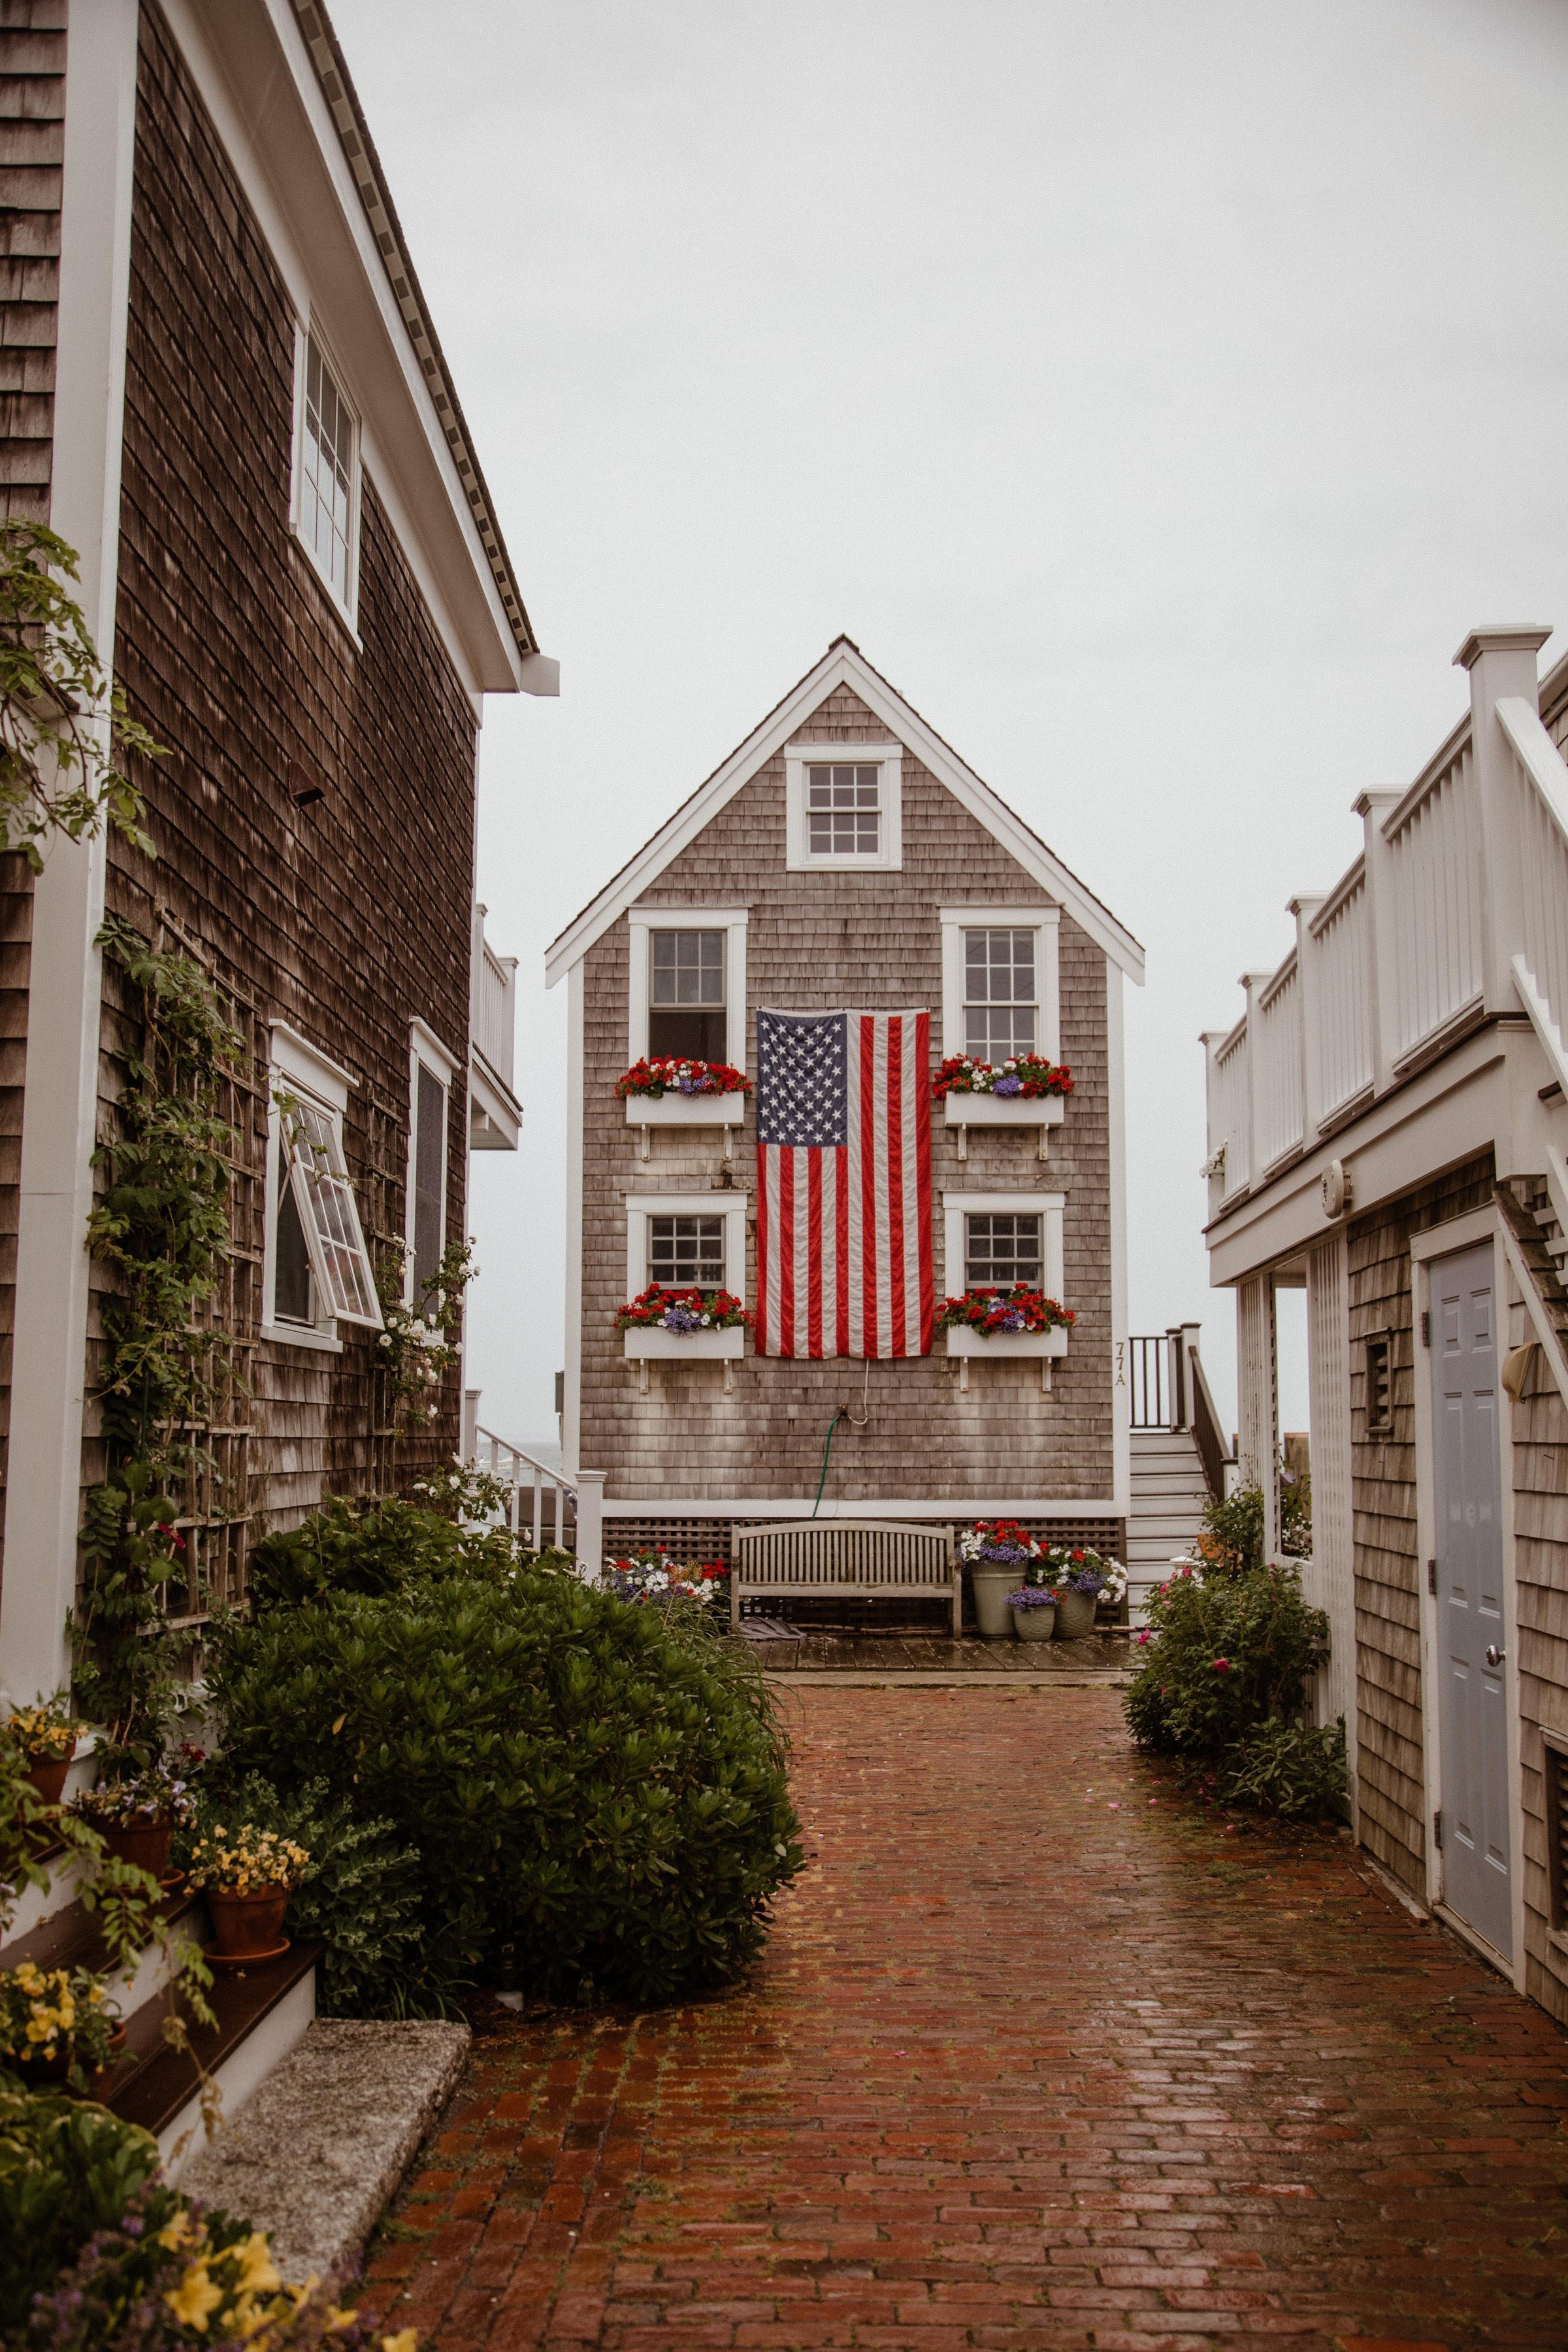 shingle house with large american flag